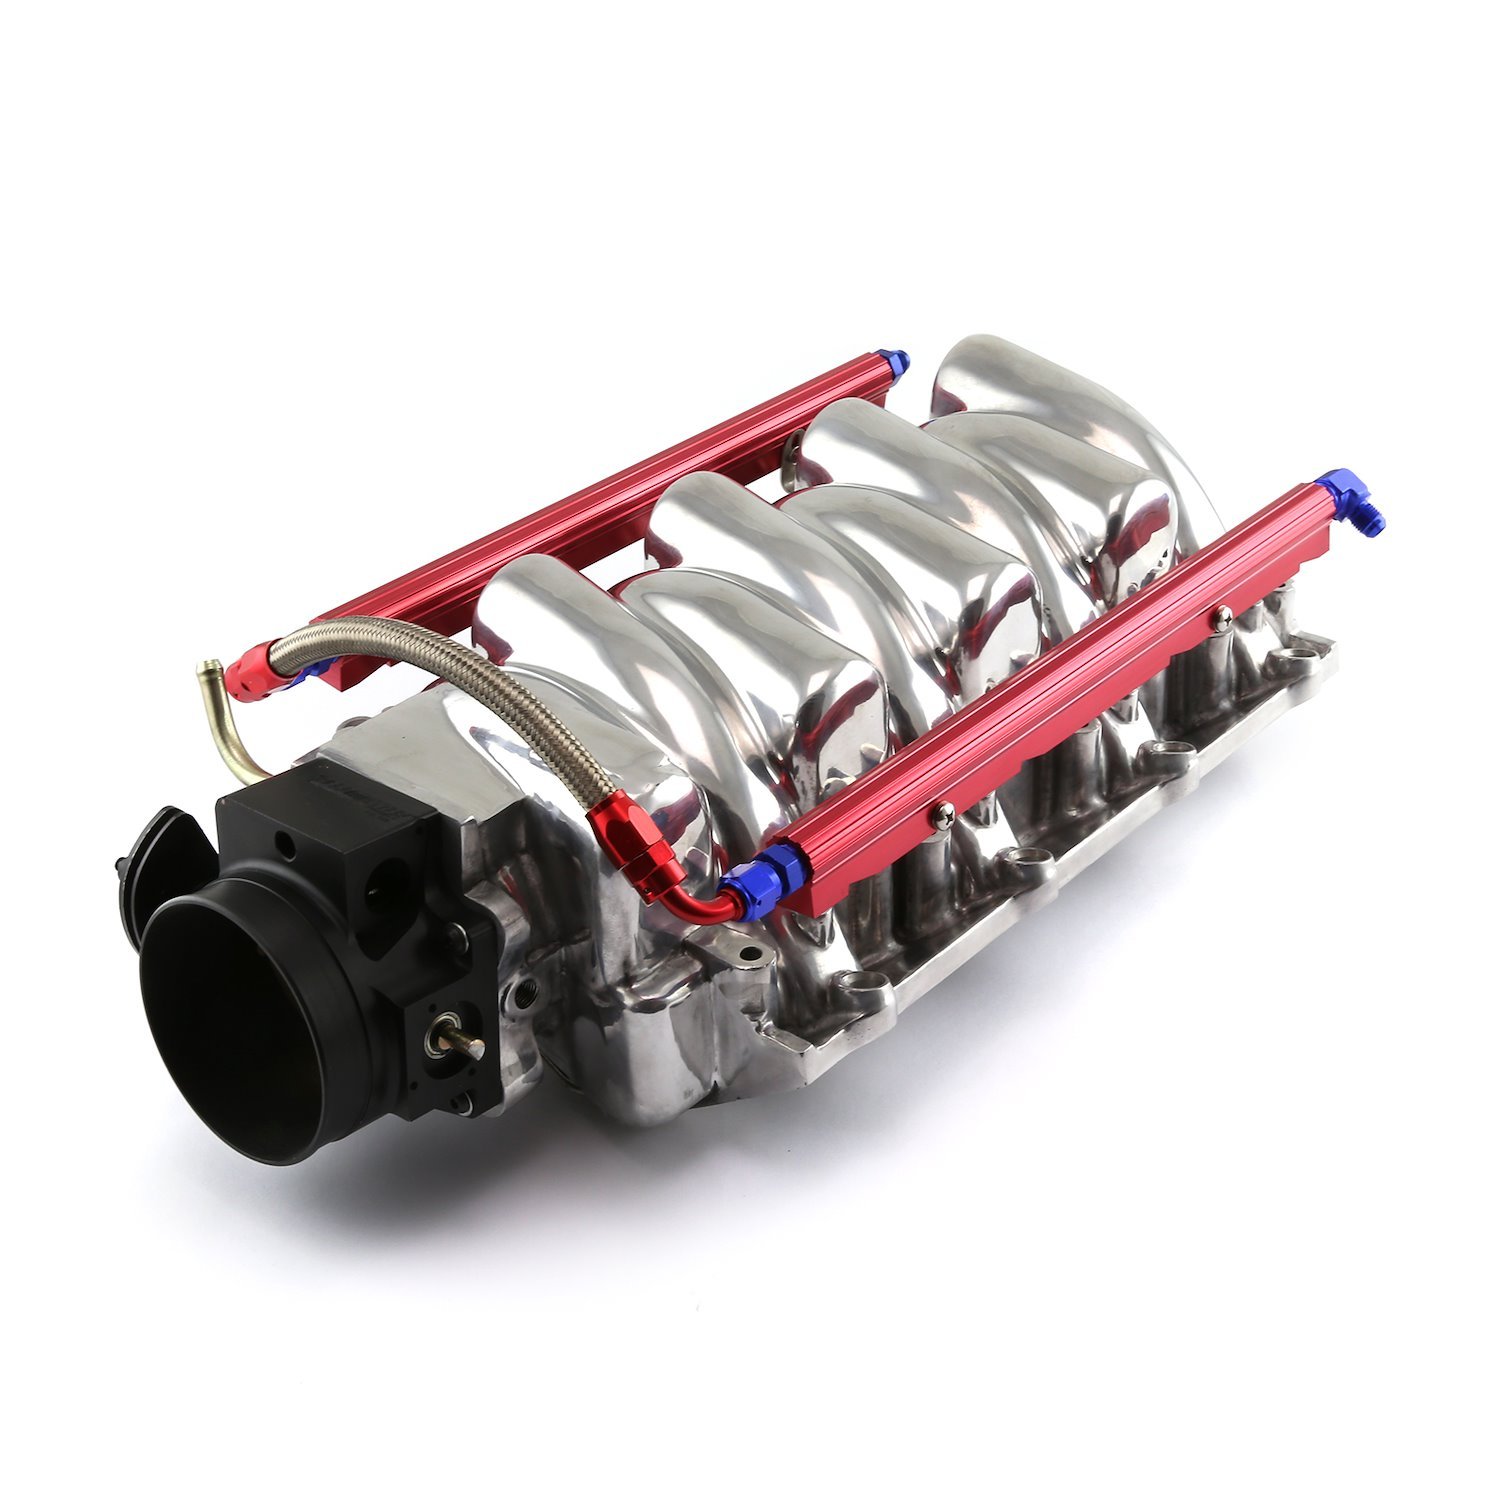 PCE148.1100.02 Chevy LS1 LS6 Polished Aluminum Intake Manifold with 92mm Throttle Body